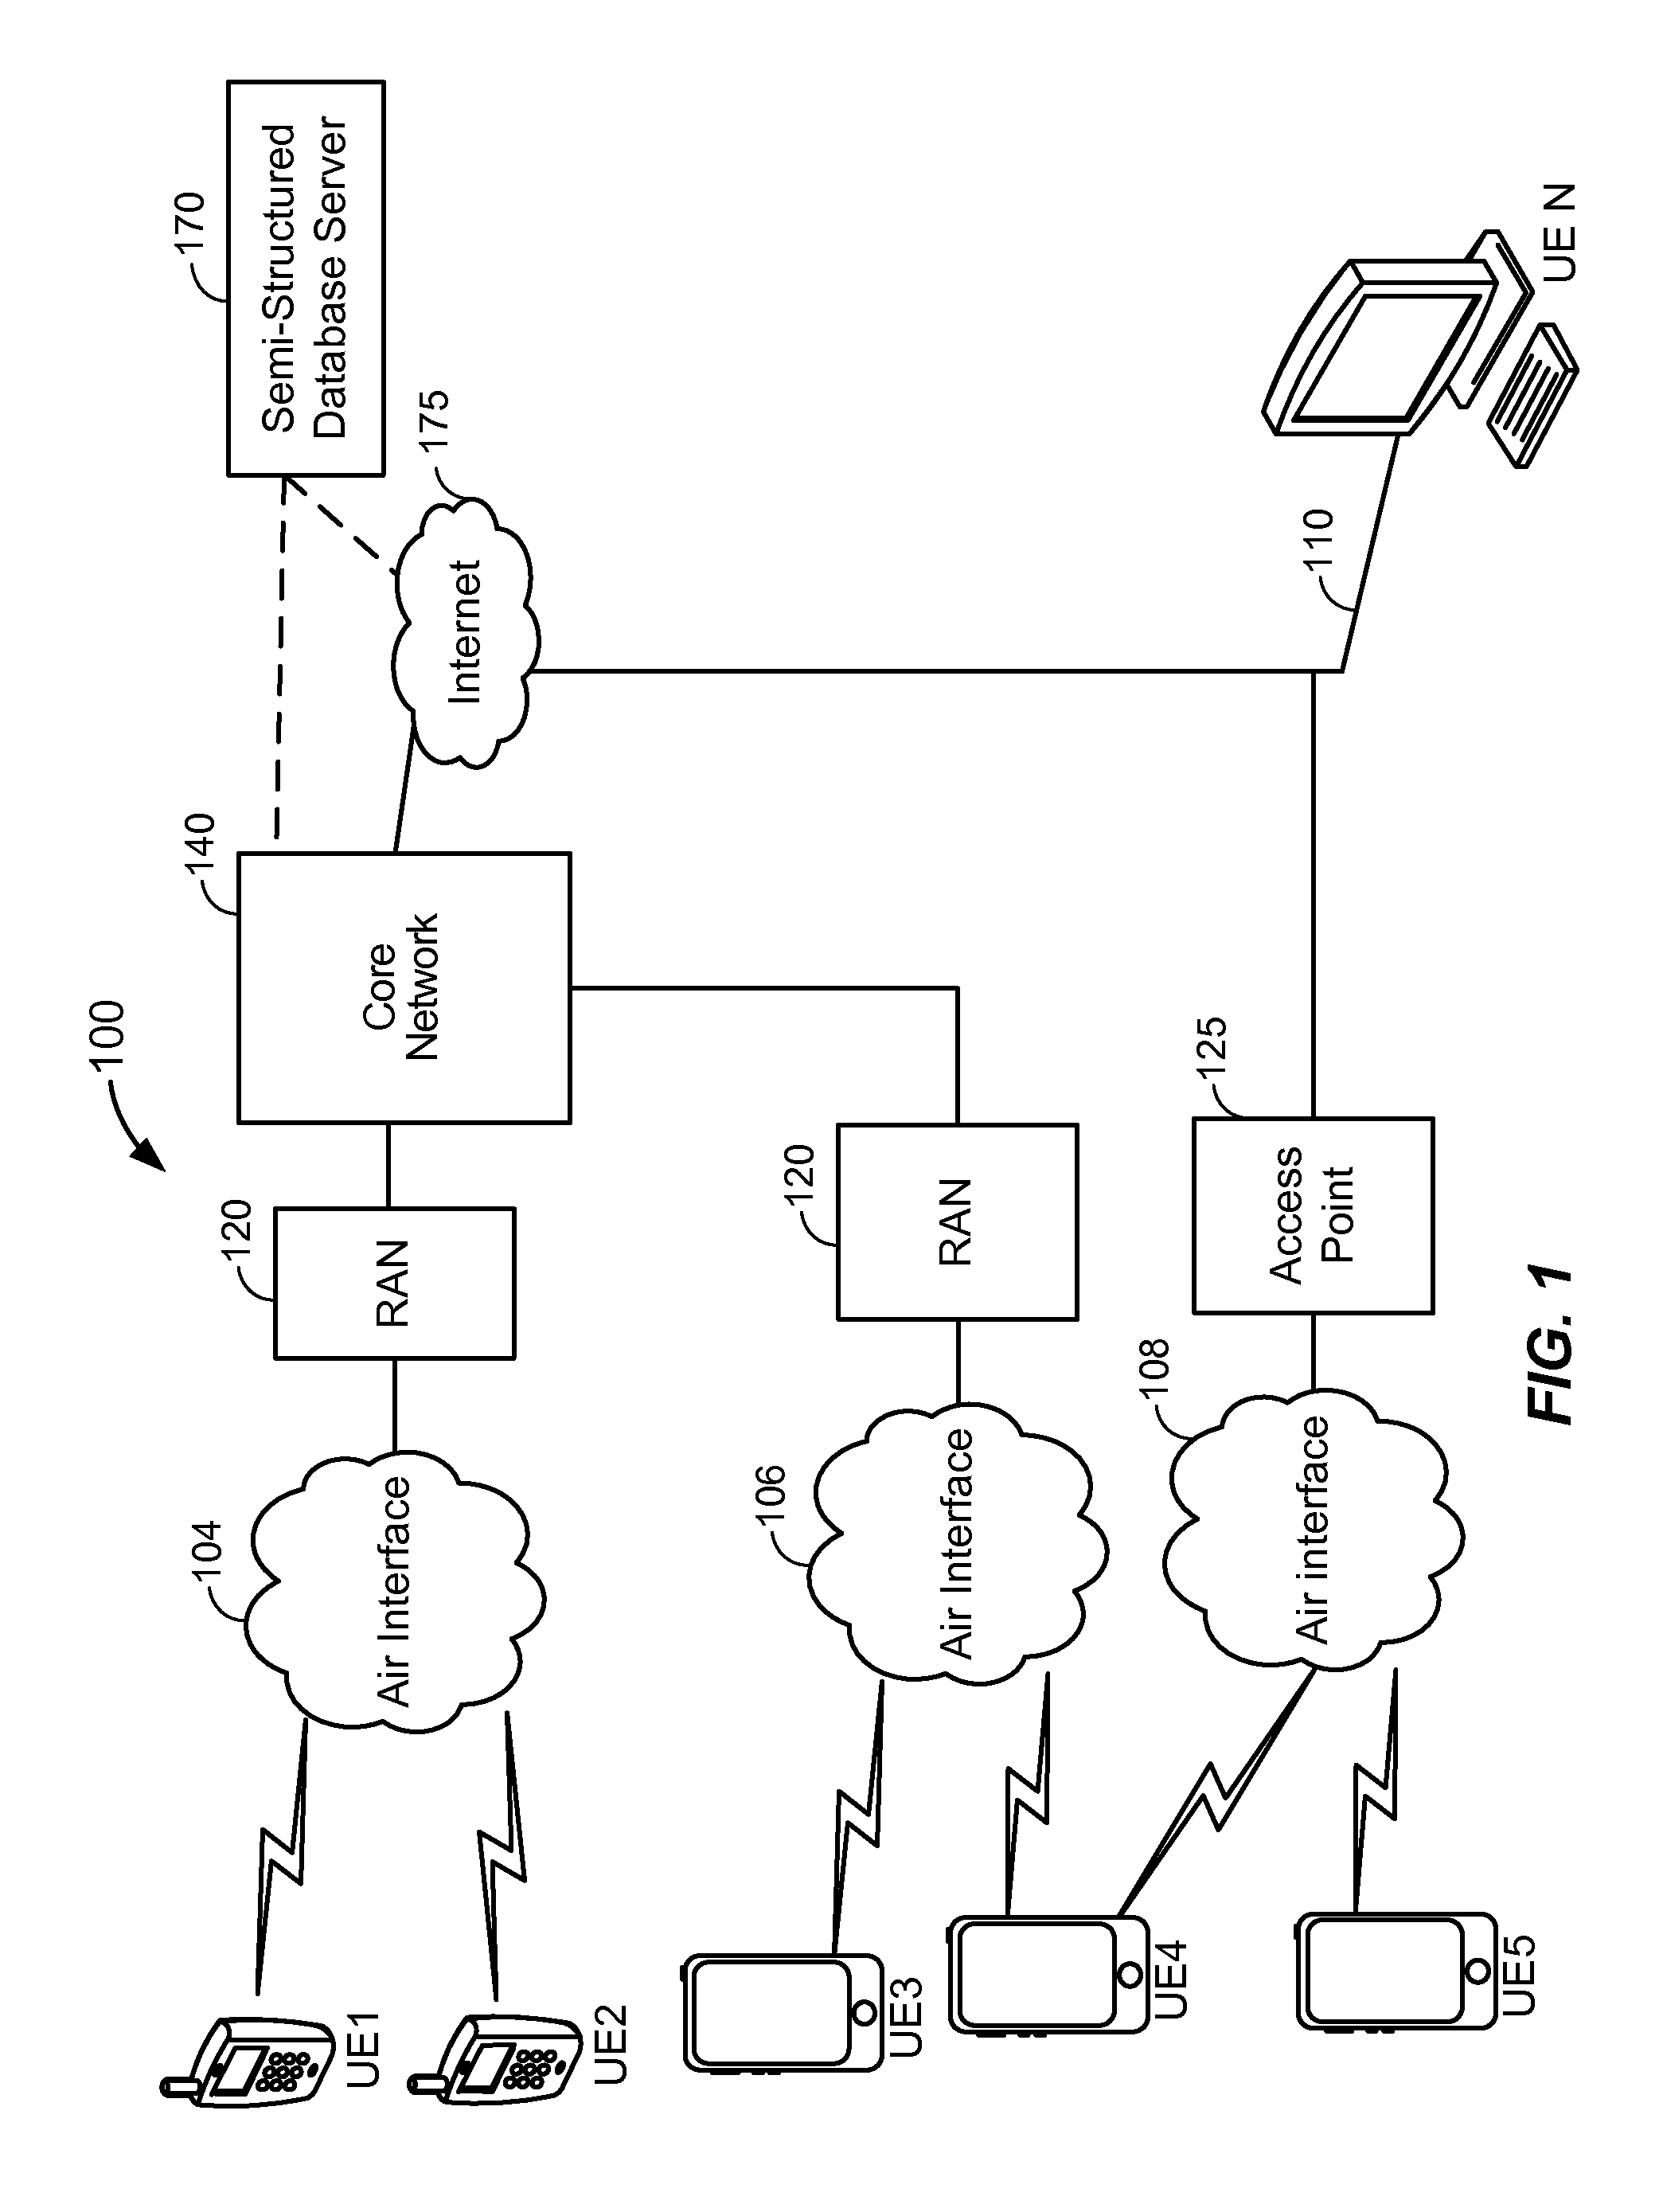 Executing a faceted search within a semi-structured database using a bloom filter